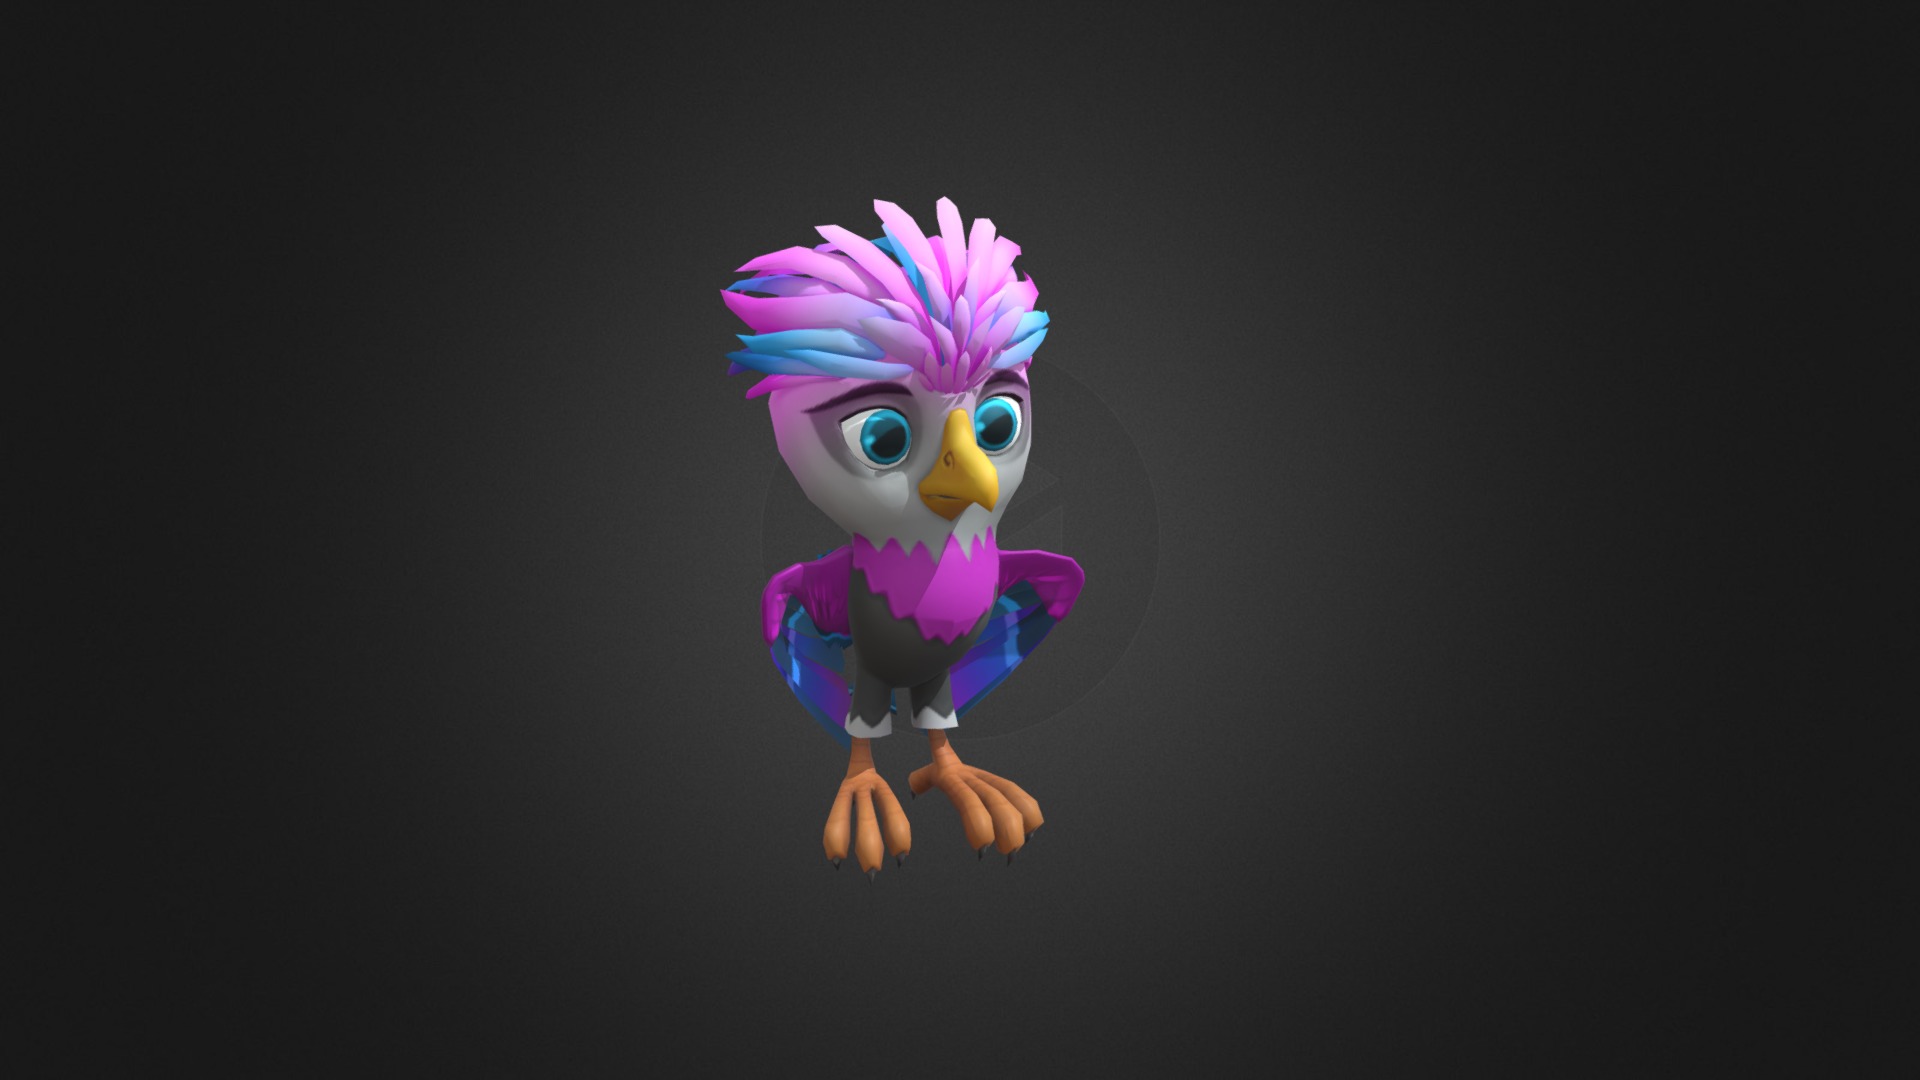 3D model Bird animated character - This is a 3D model of the Bird animated character. The 3D model is about a toy figurine on a black background.